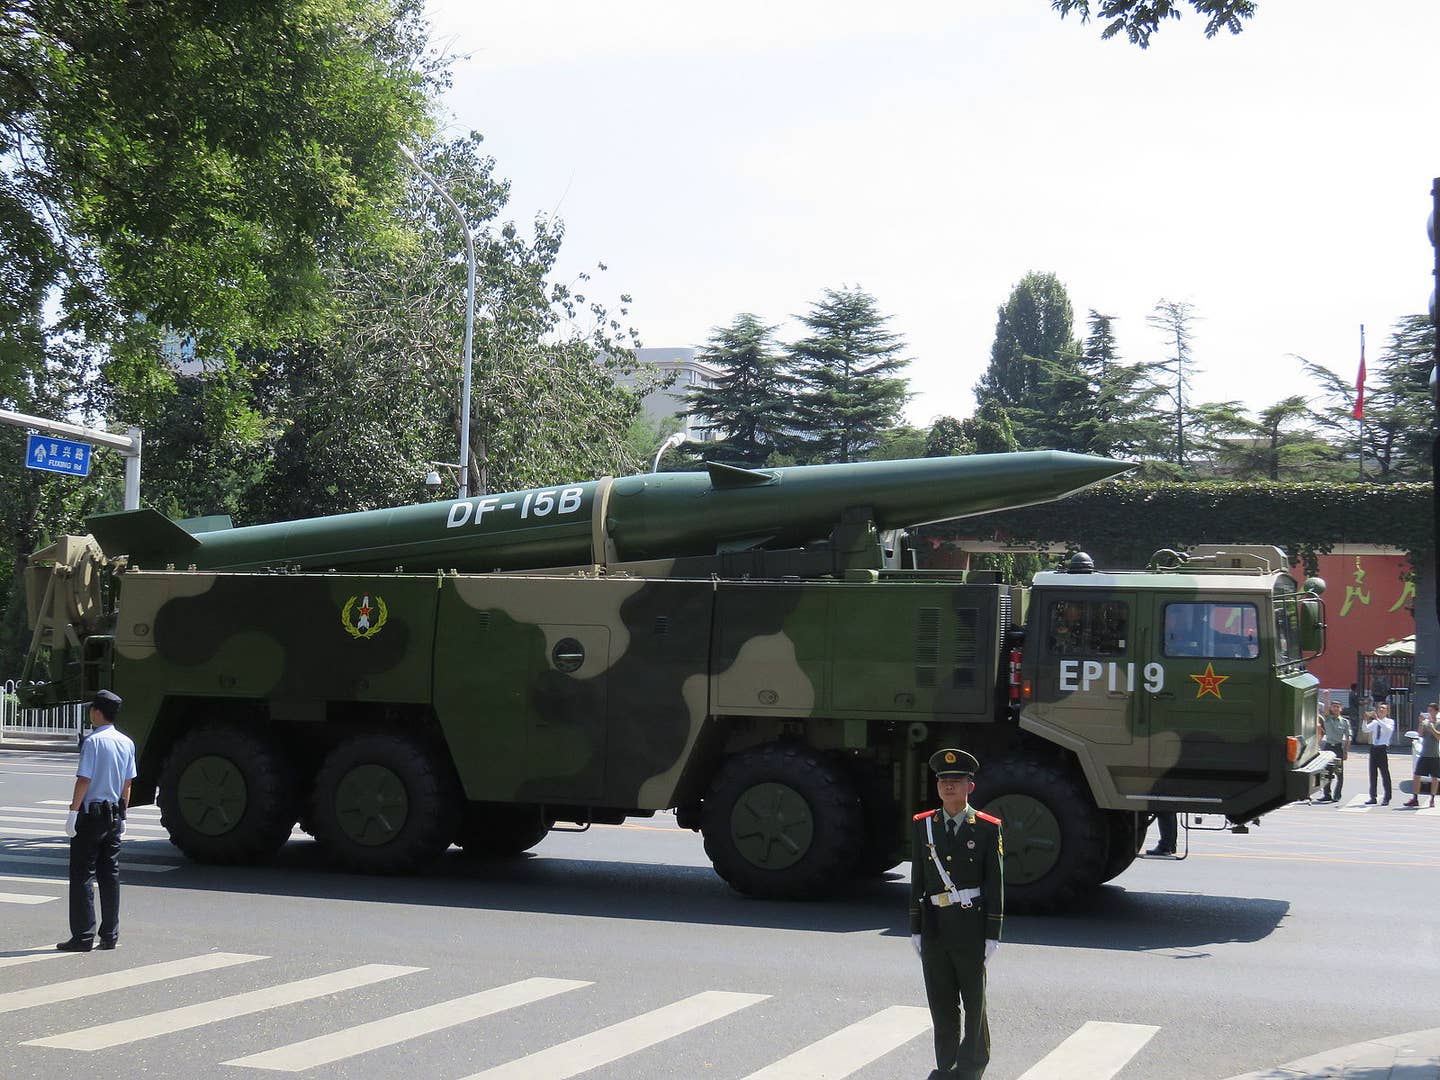 china nuclear df-15